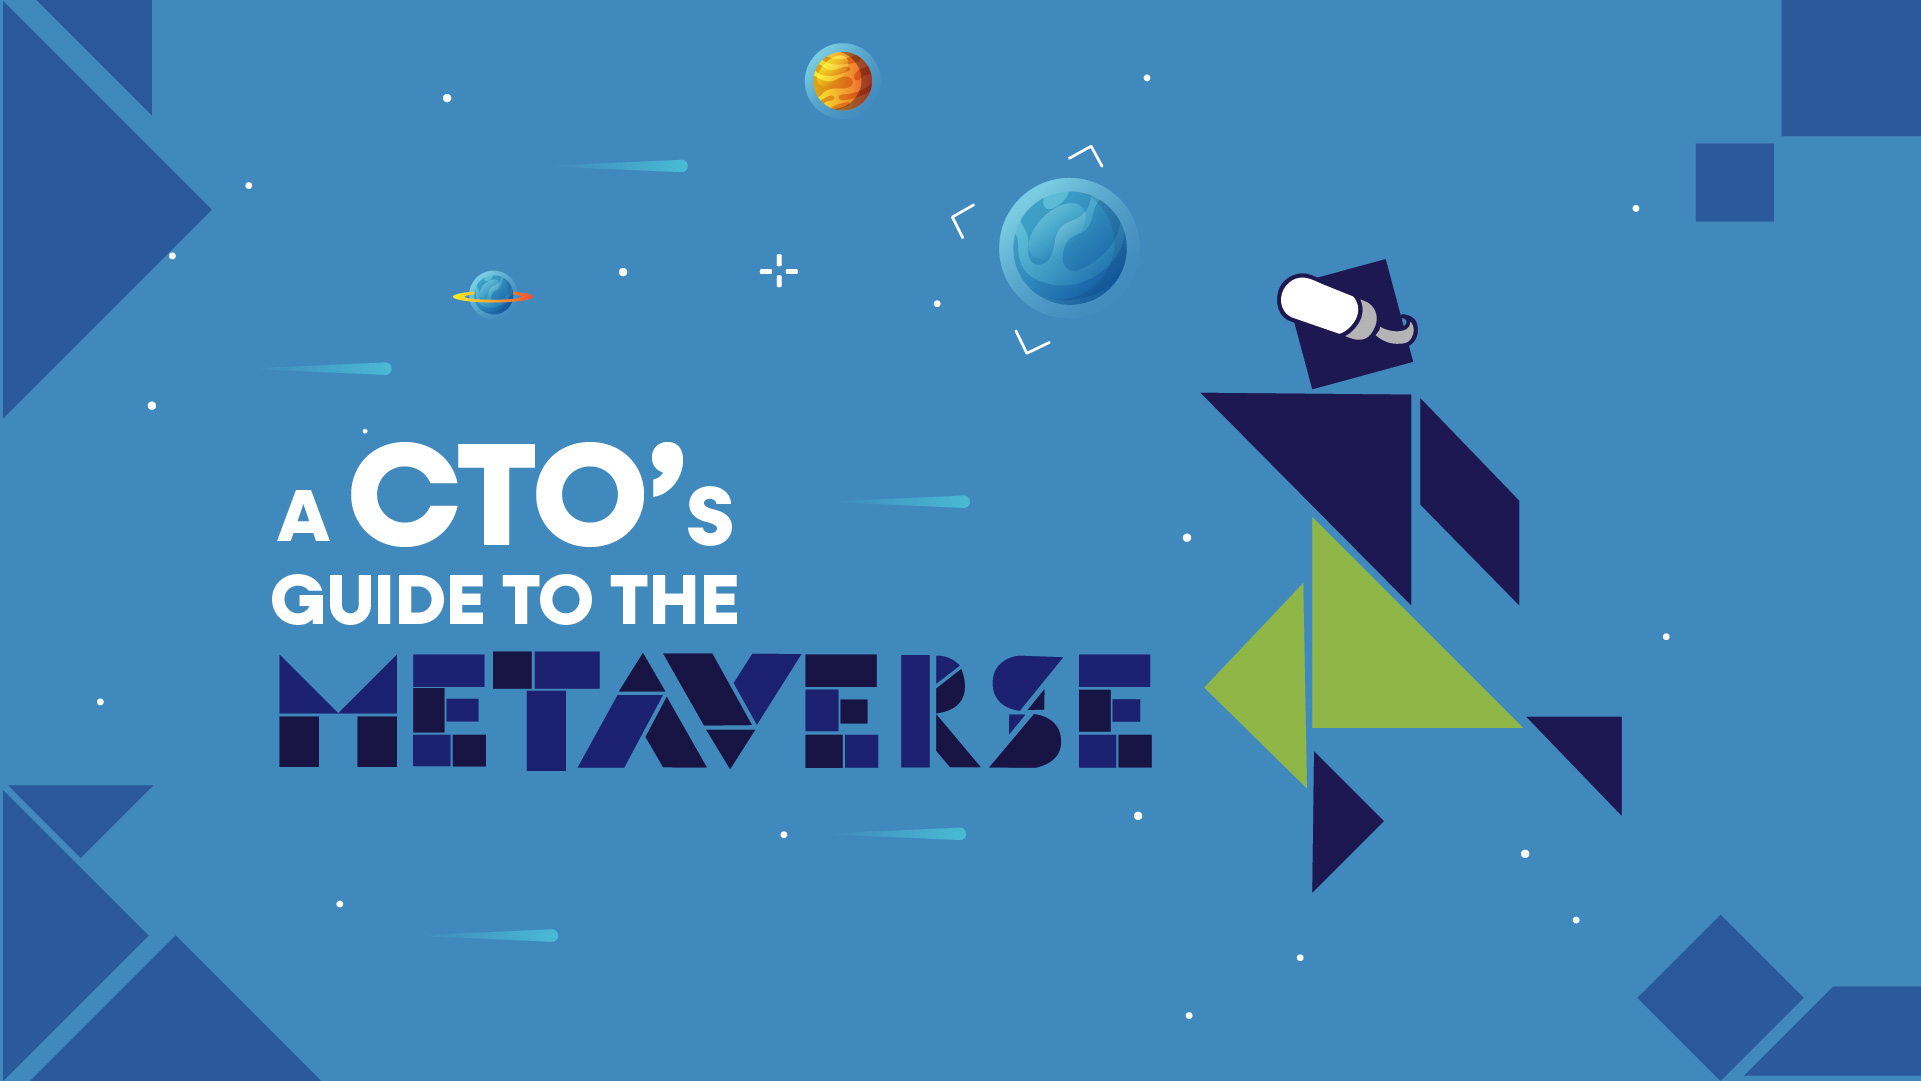 A CTO’s Guide to the Metaverse